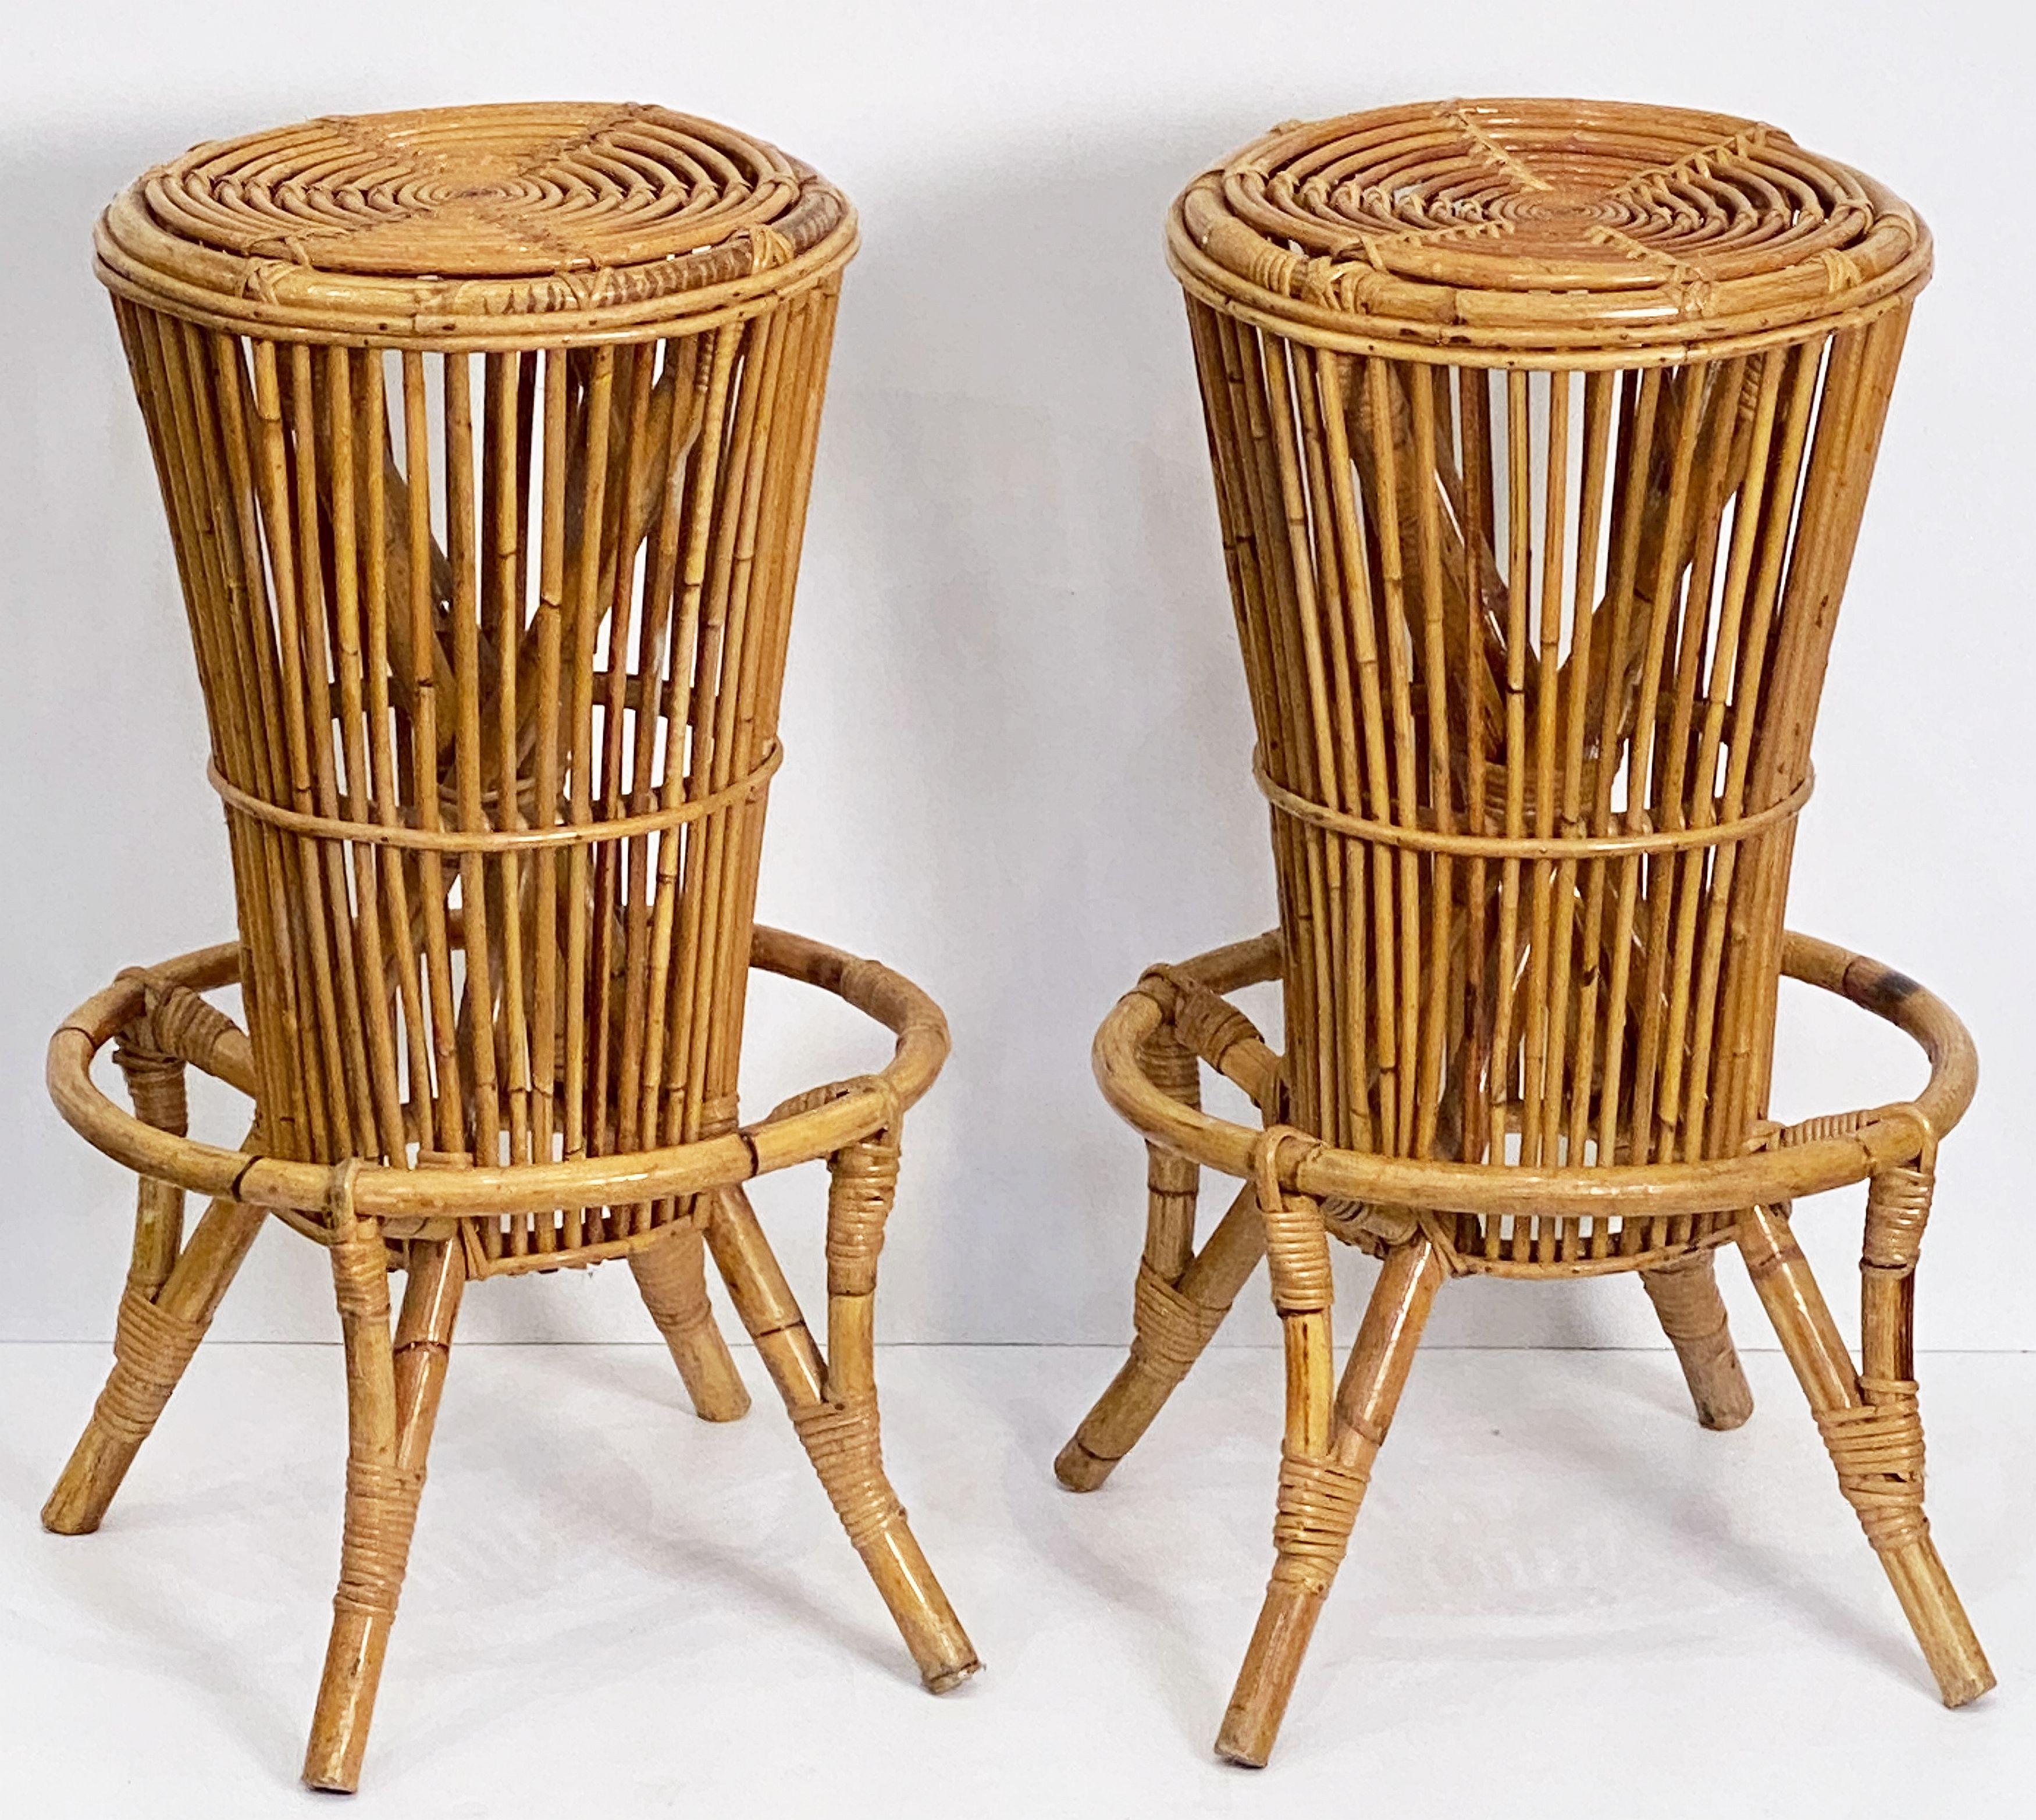 Italian Stool of Rattan and Bamboo from the Mid-20th Century For Sale 13